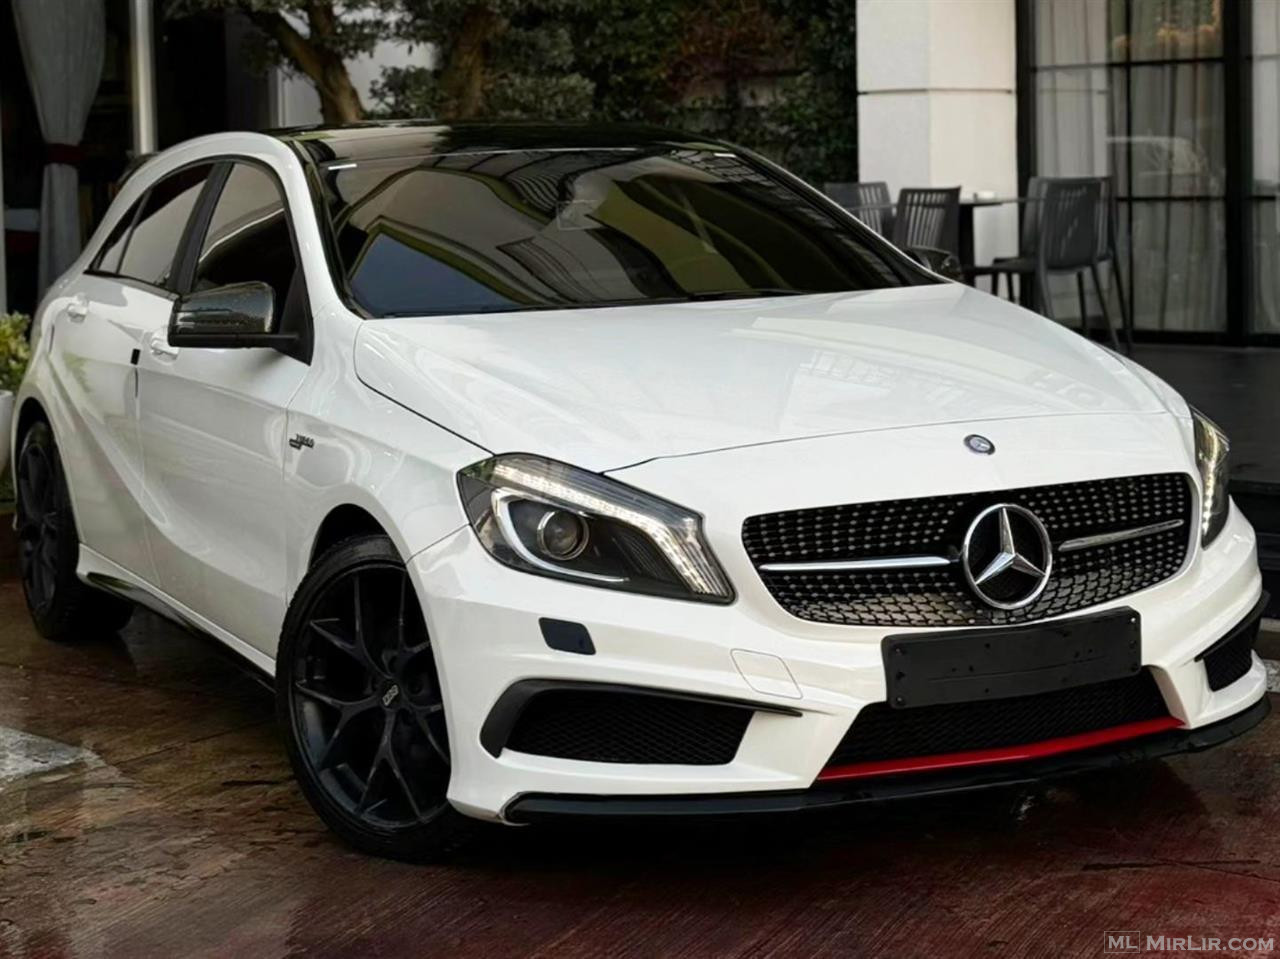 A 200 NAFT 2014 (LOOK 45 AMG) FULL OPSION